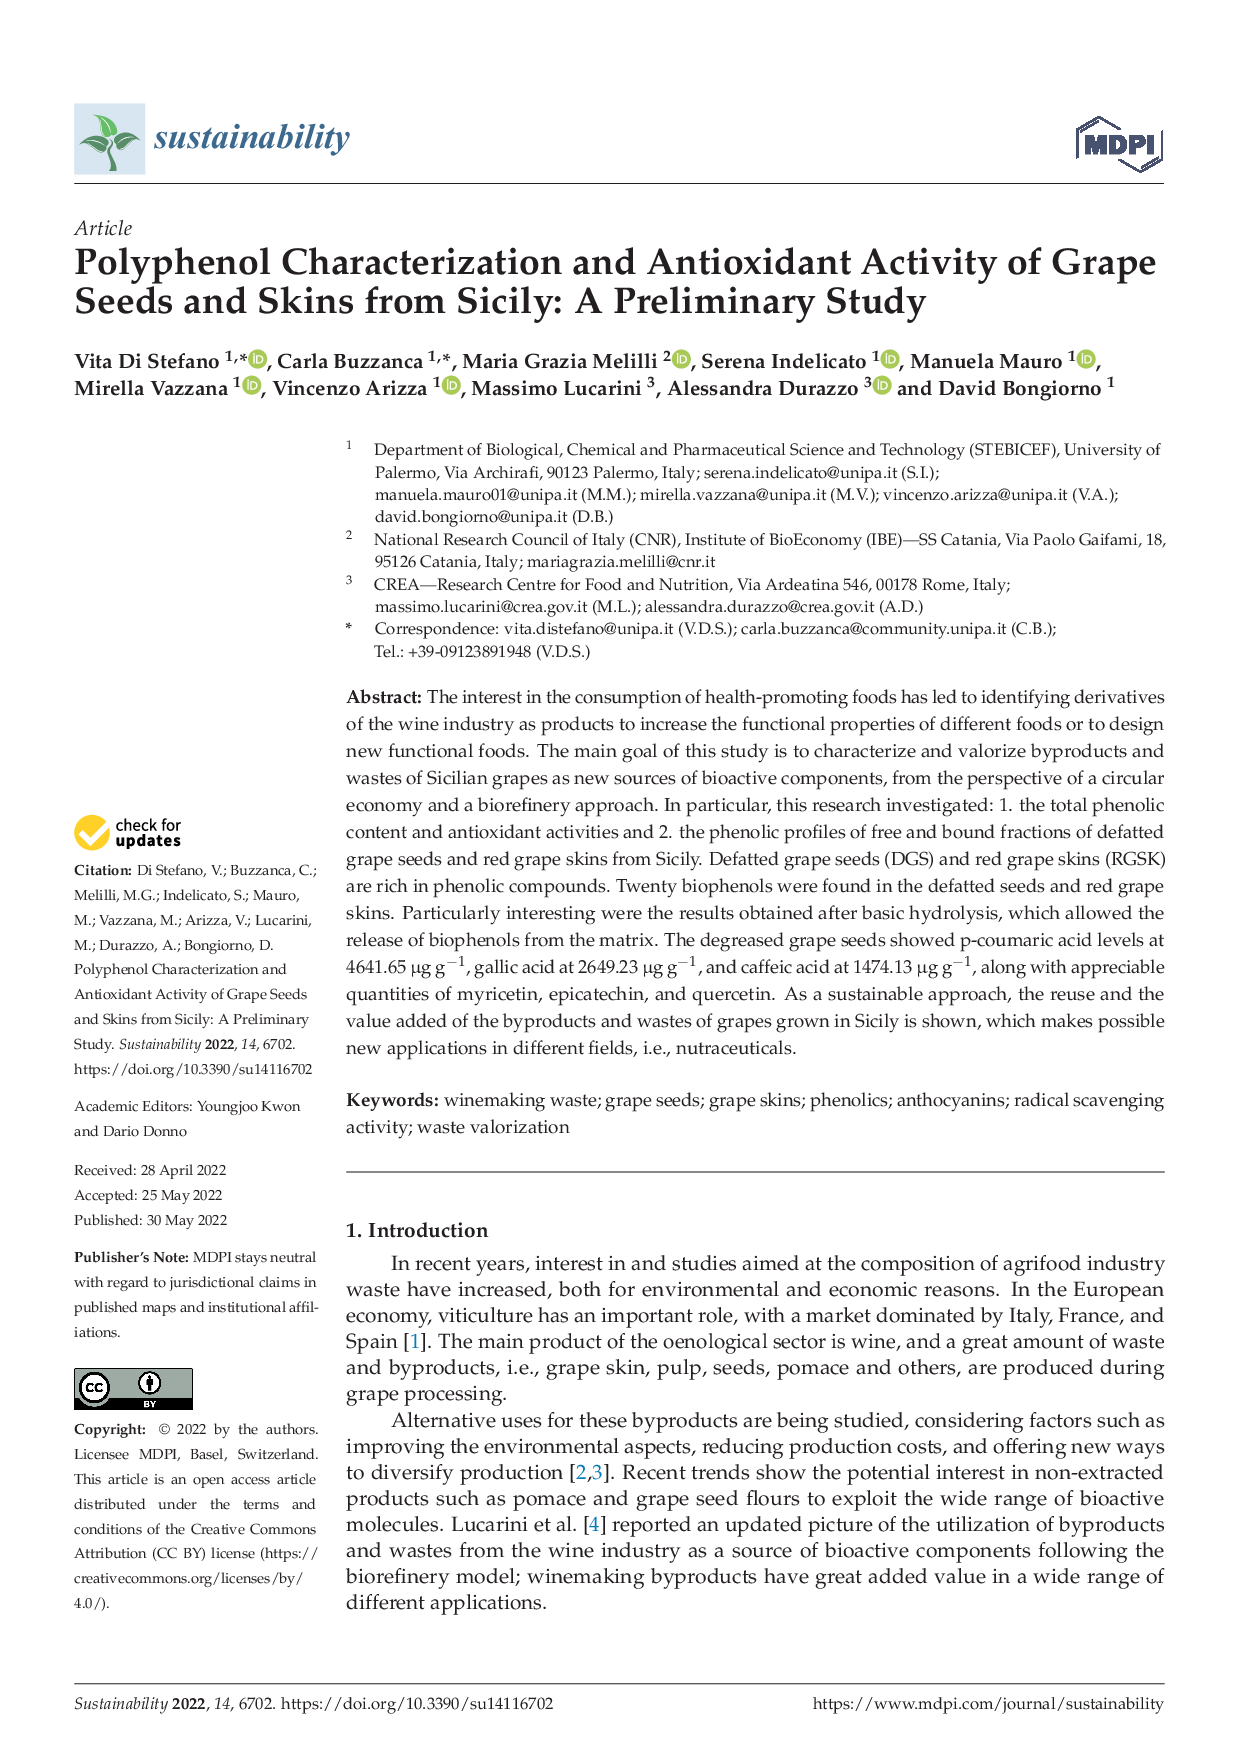 Polyphenol Characterization and Antioxidant Activity of Grape Seeds and Skins from Sicily: A Preliminary Study